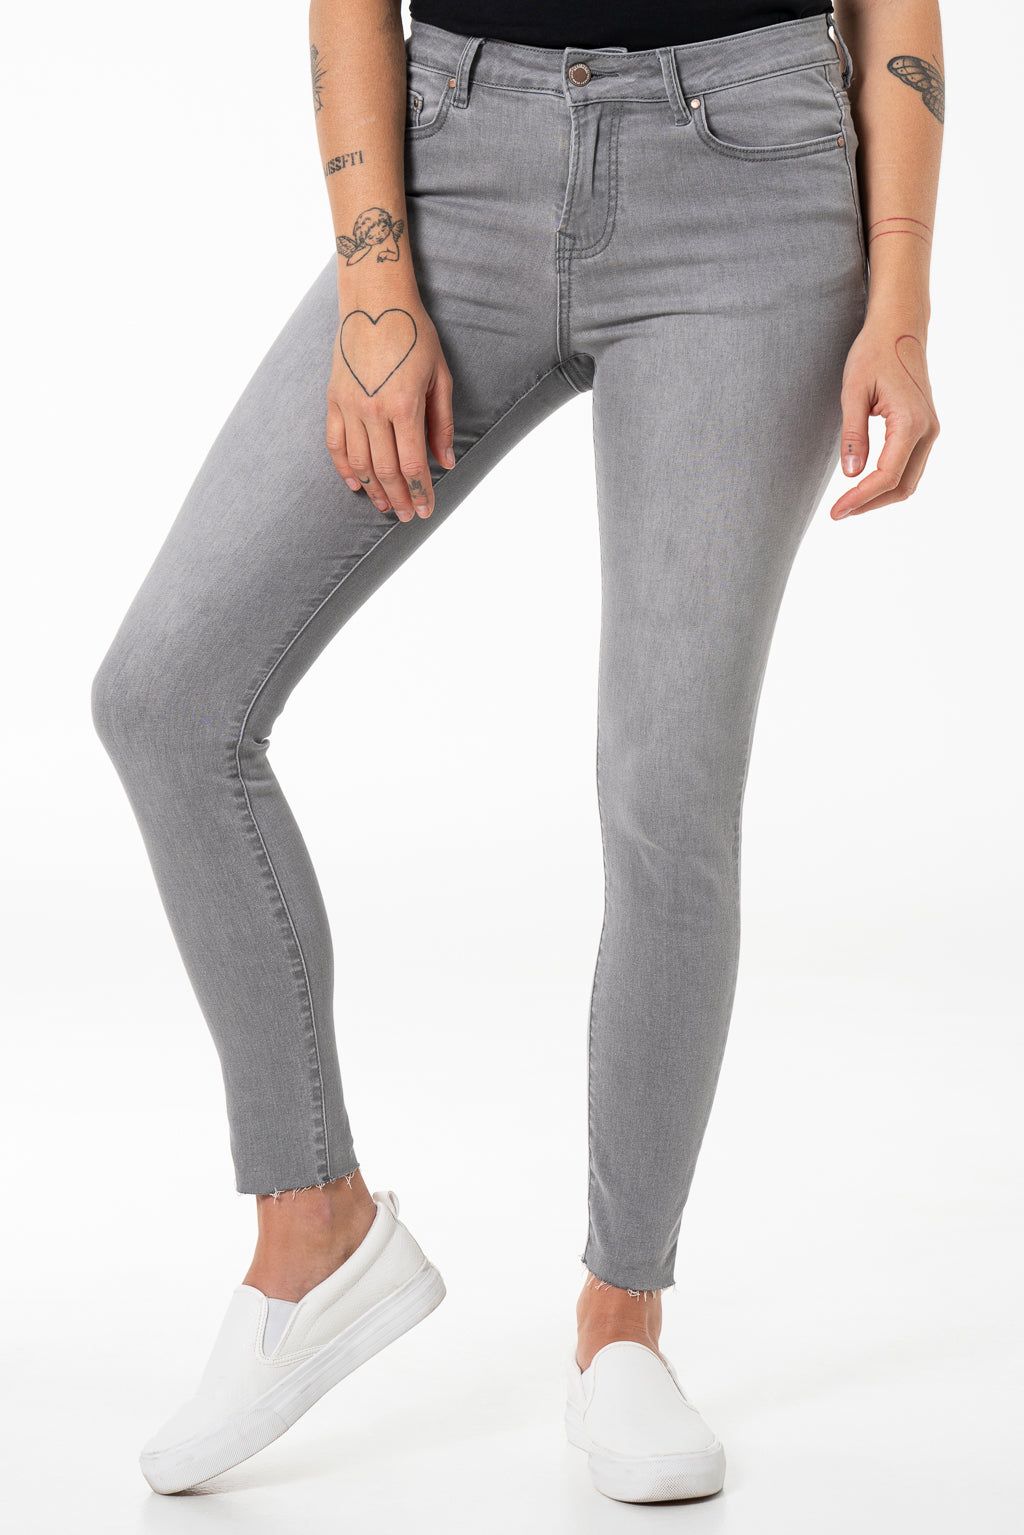 Rf12 Mid-Rise Skinny Jeans _ 142449 _ Grey Wash from REFINERY – Refinery